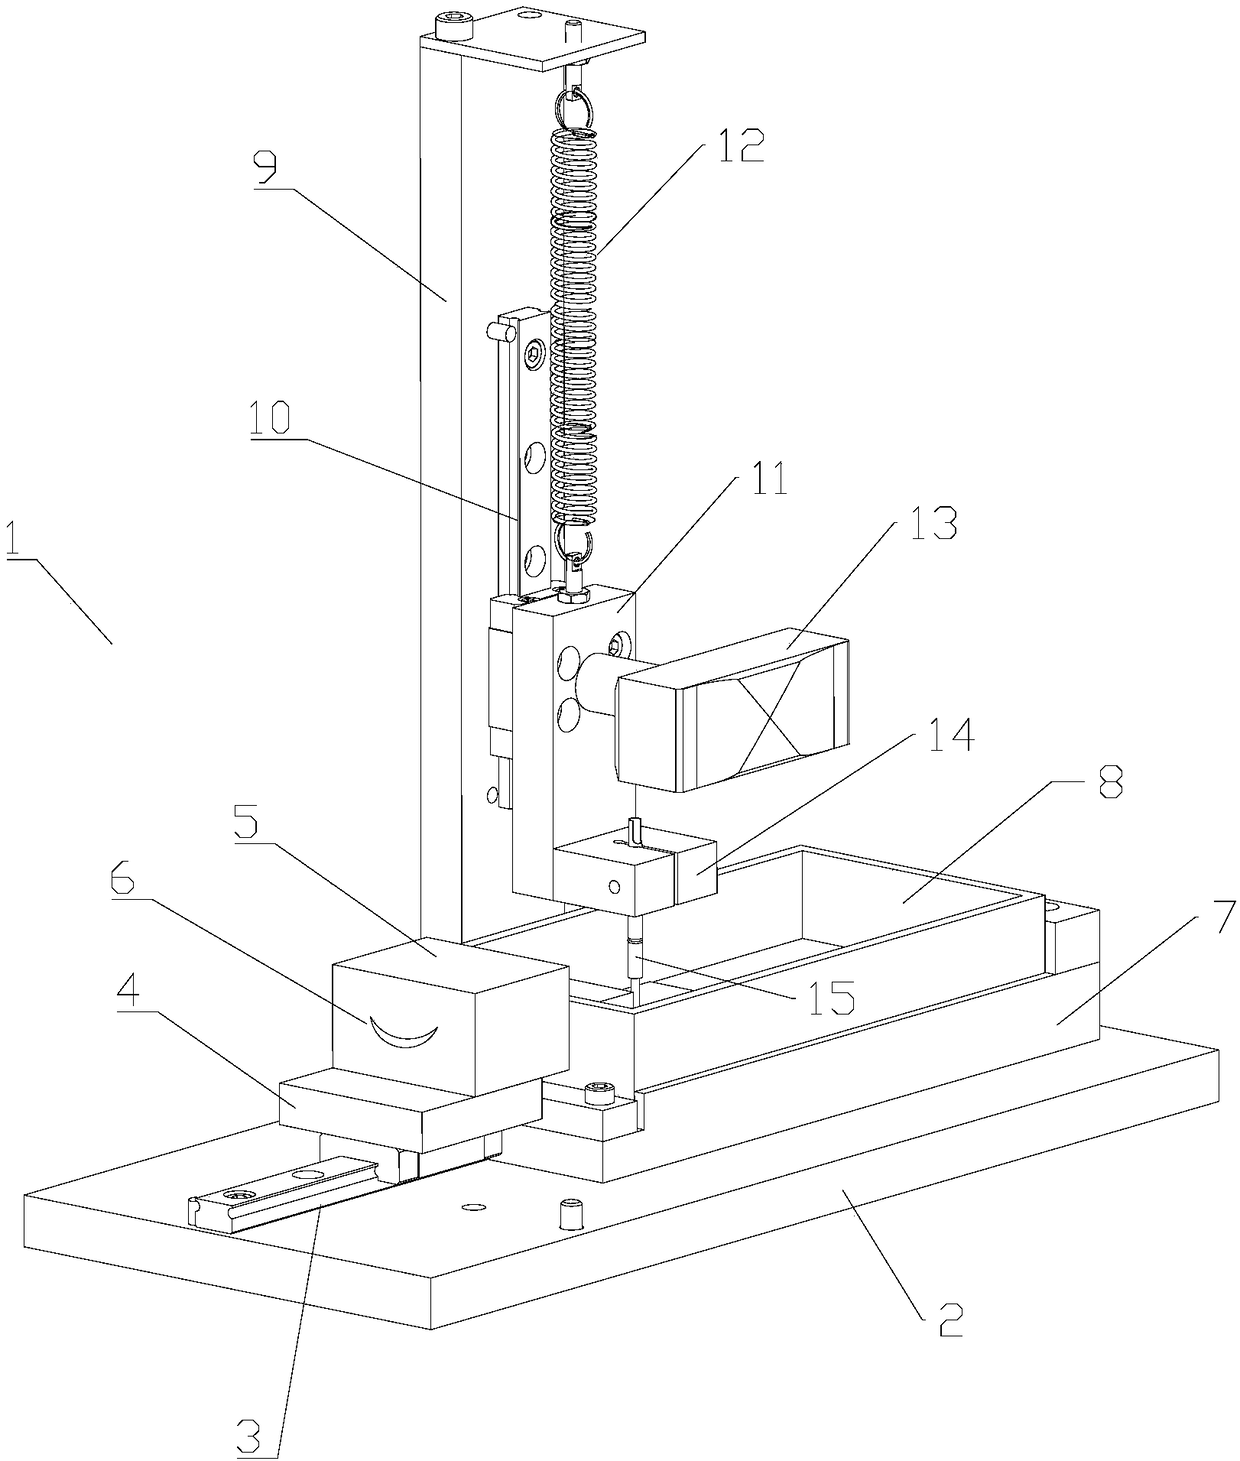 Manual fixture for quickly perforating on edge of multi-layer rubber sheet